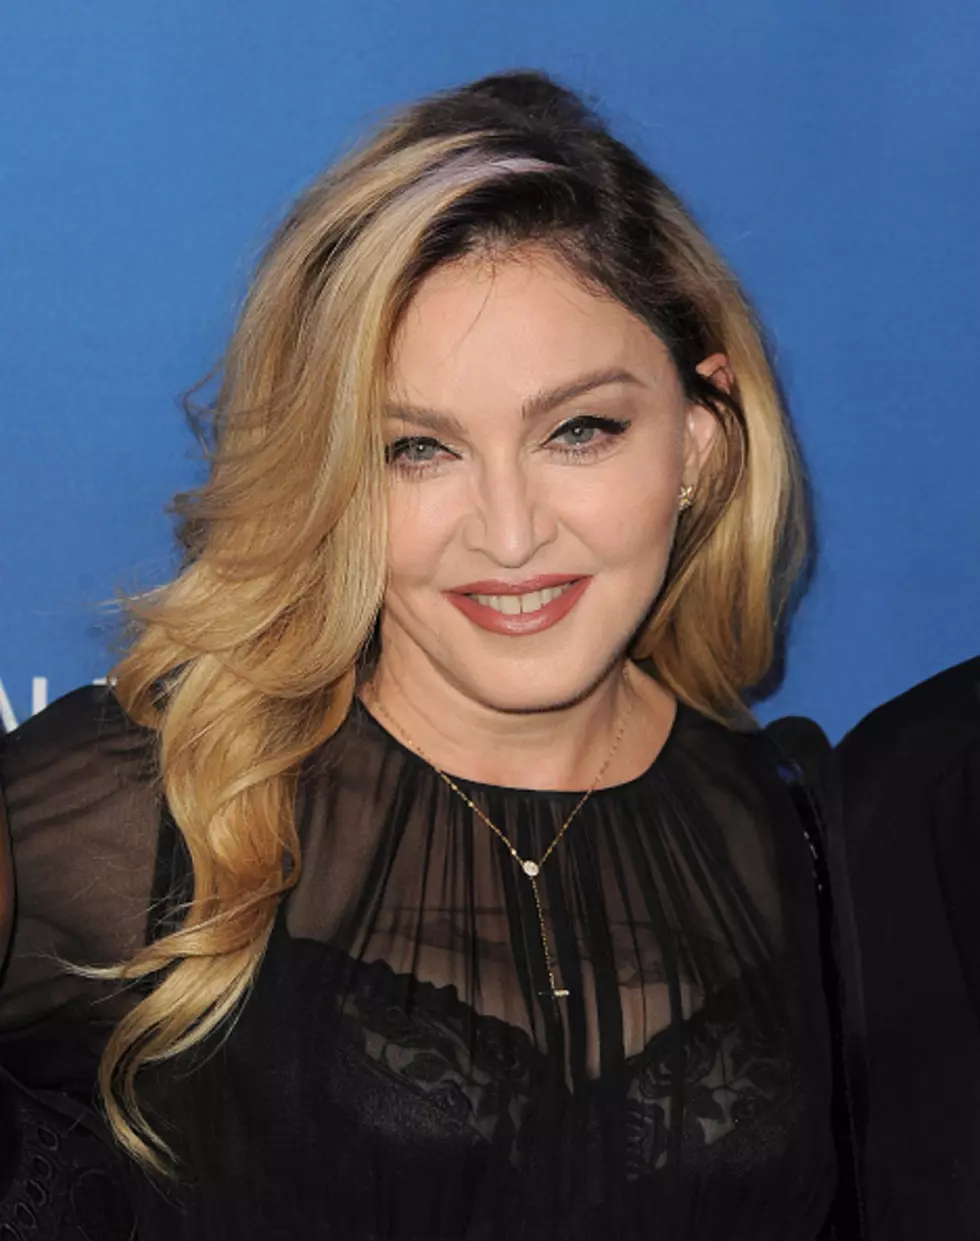 Is Madonna Hammered? [VIDEO]